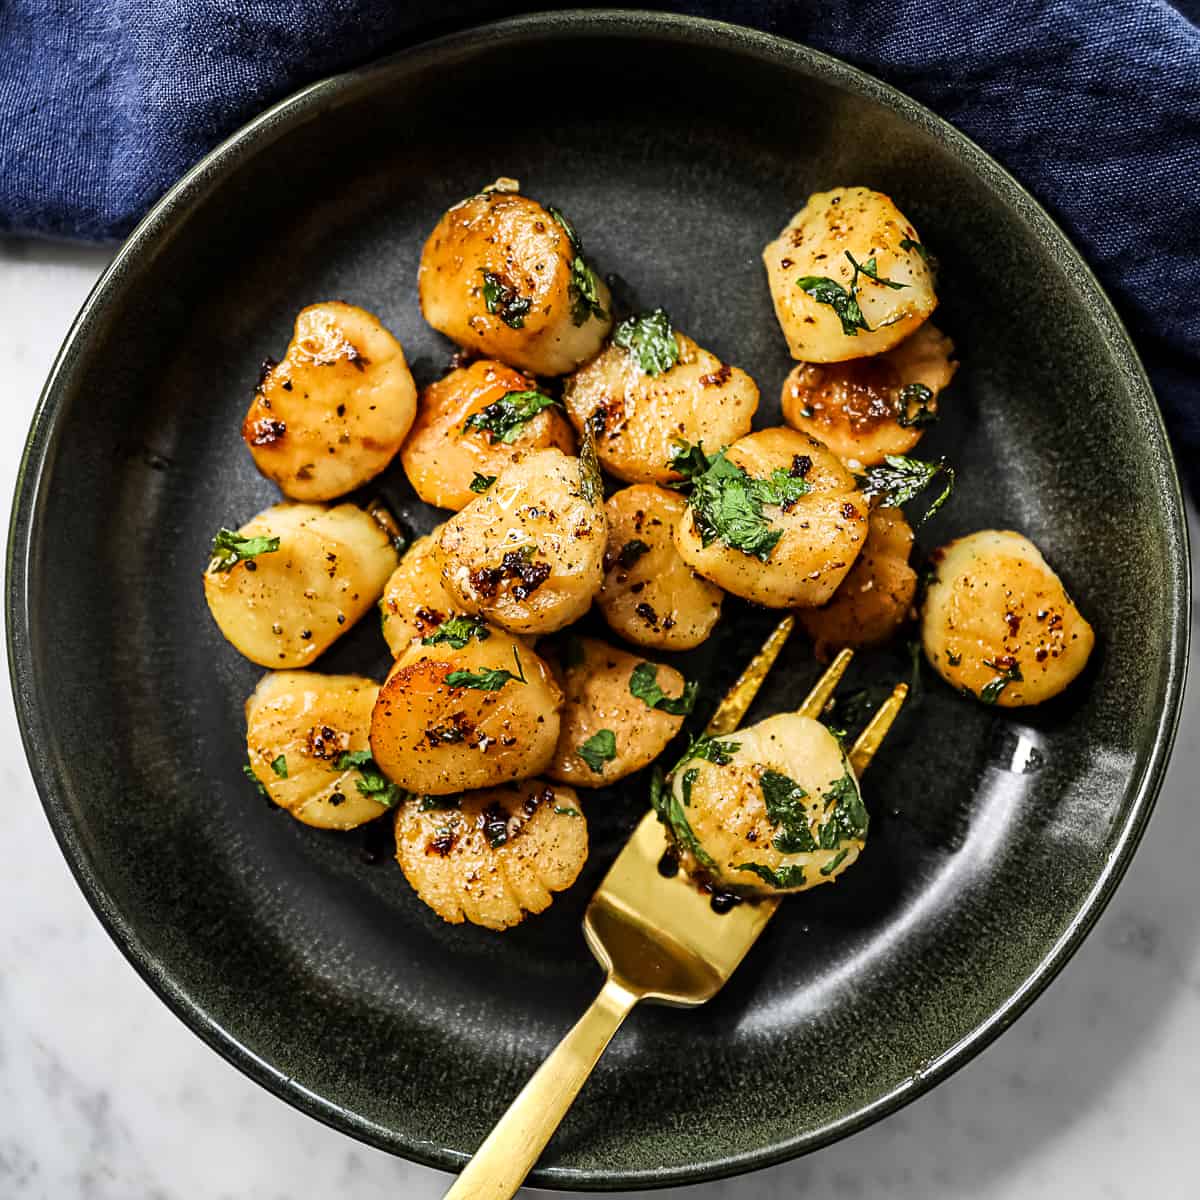 Traeger Smoked Scallops with butter sauce and herbs